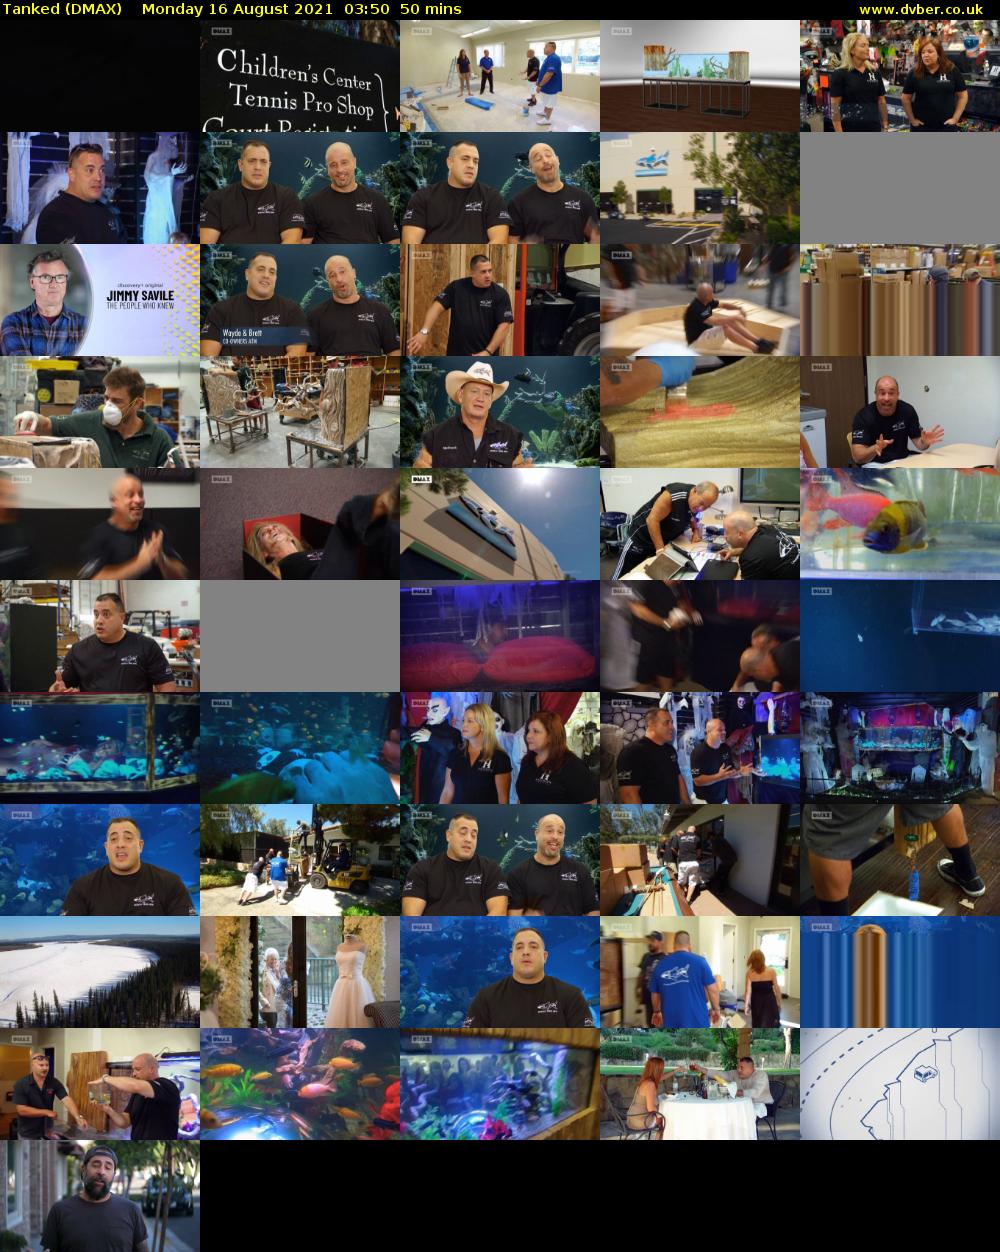 Tanked (DMAX) Monday 16 August 2021 03:50 - 04:40